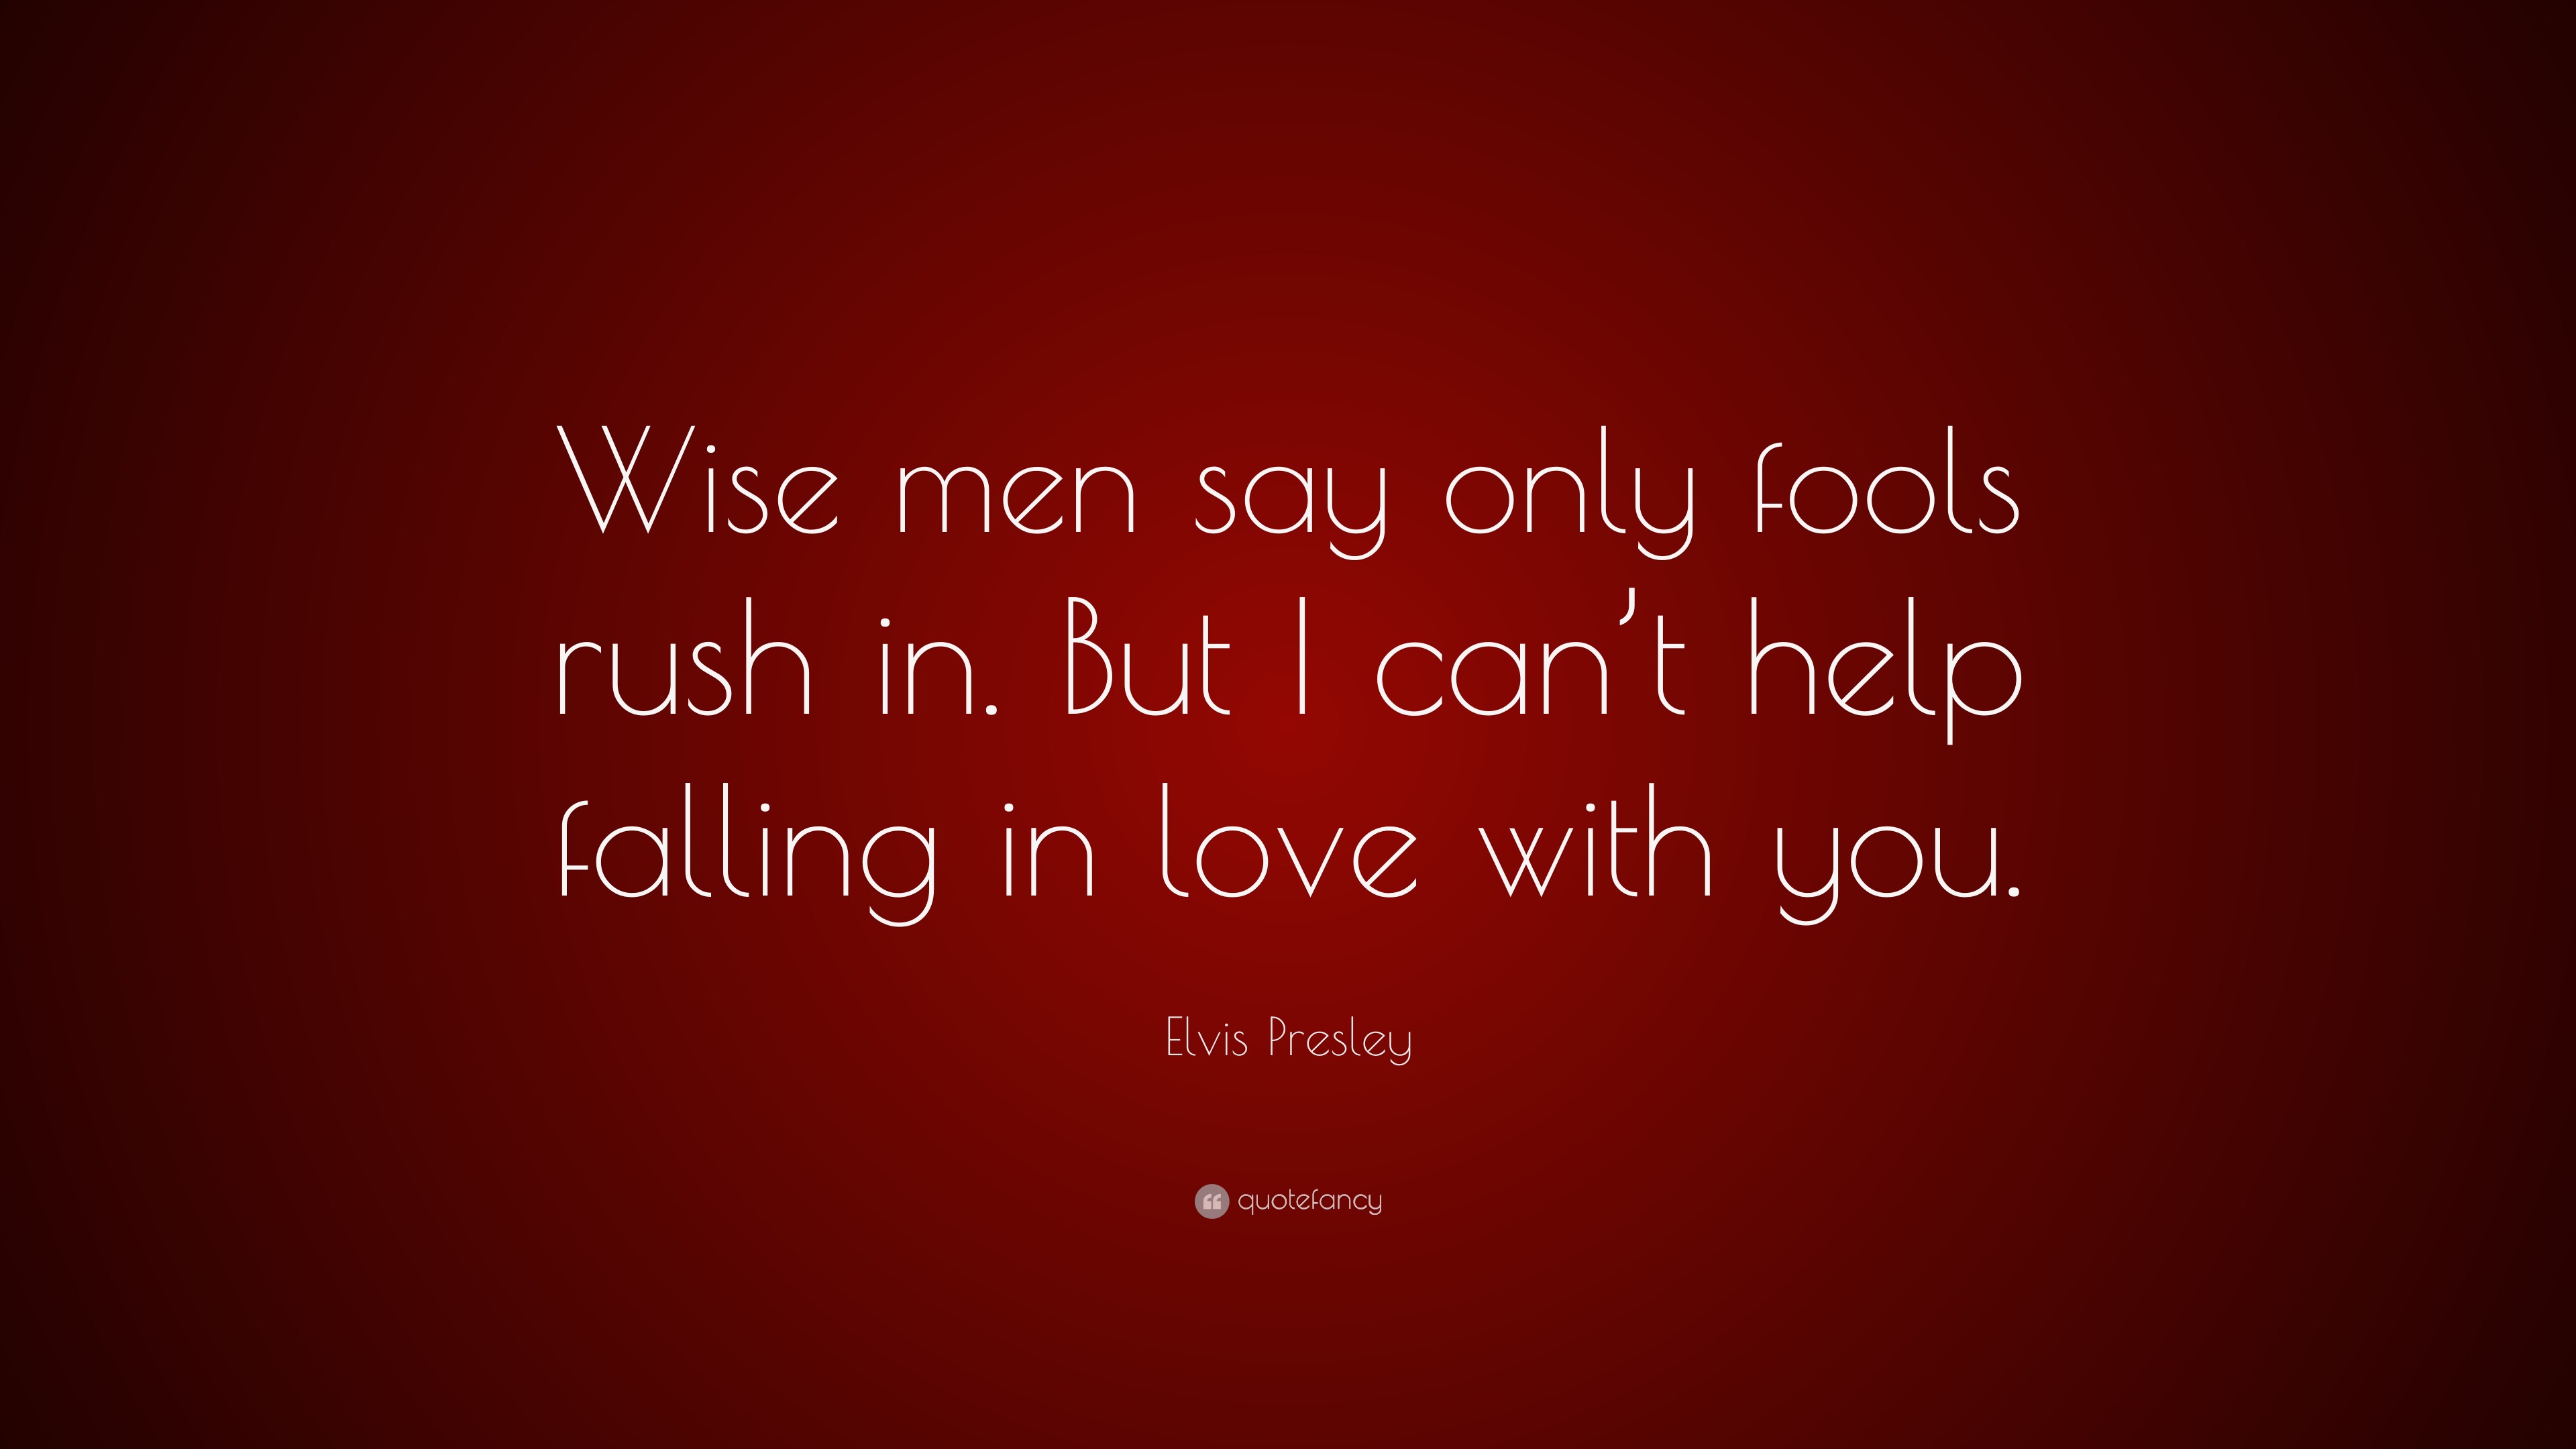 Elvis Presley Quote “Wise men say only fools rush in But I can